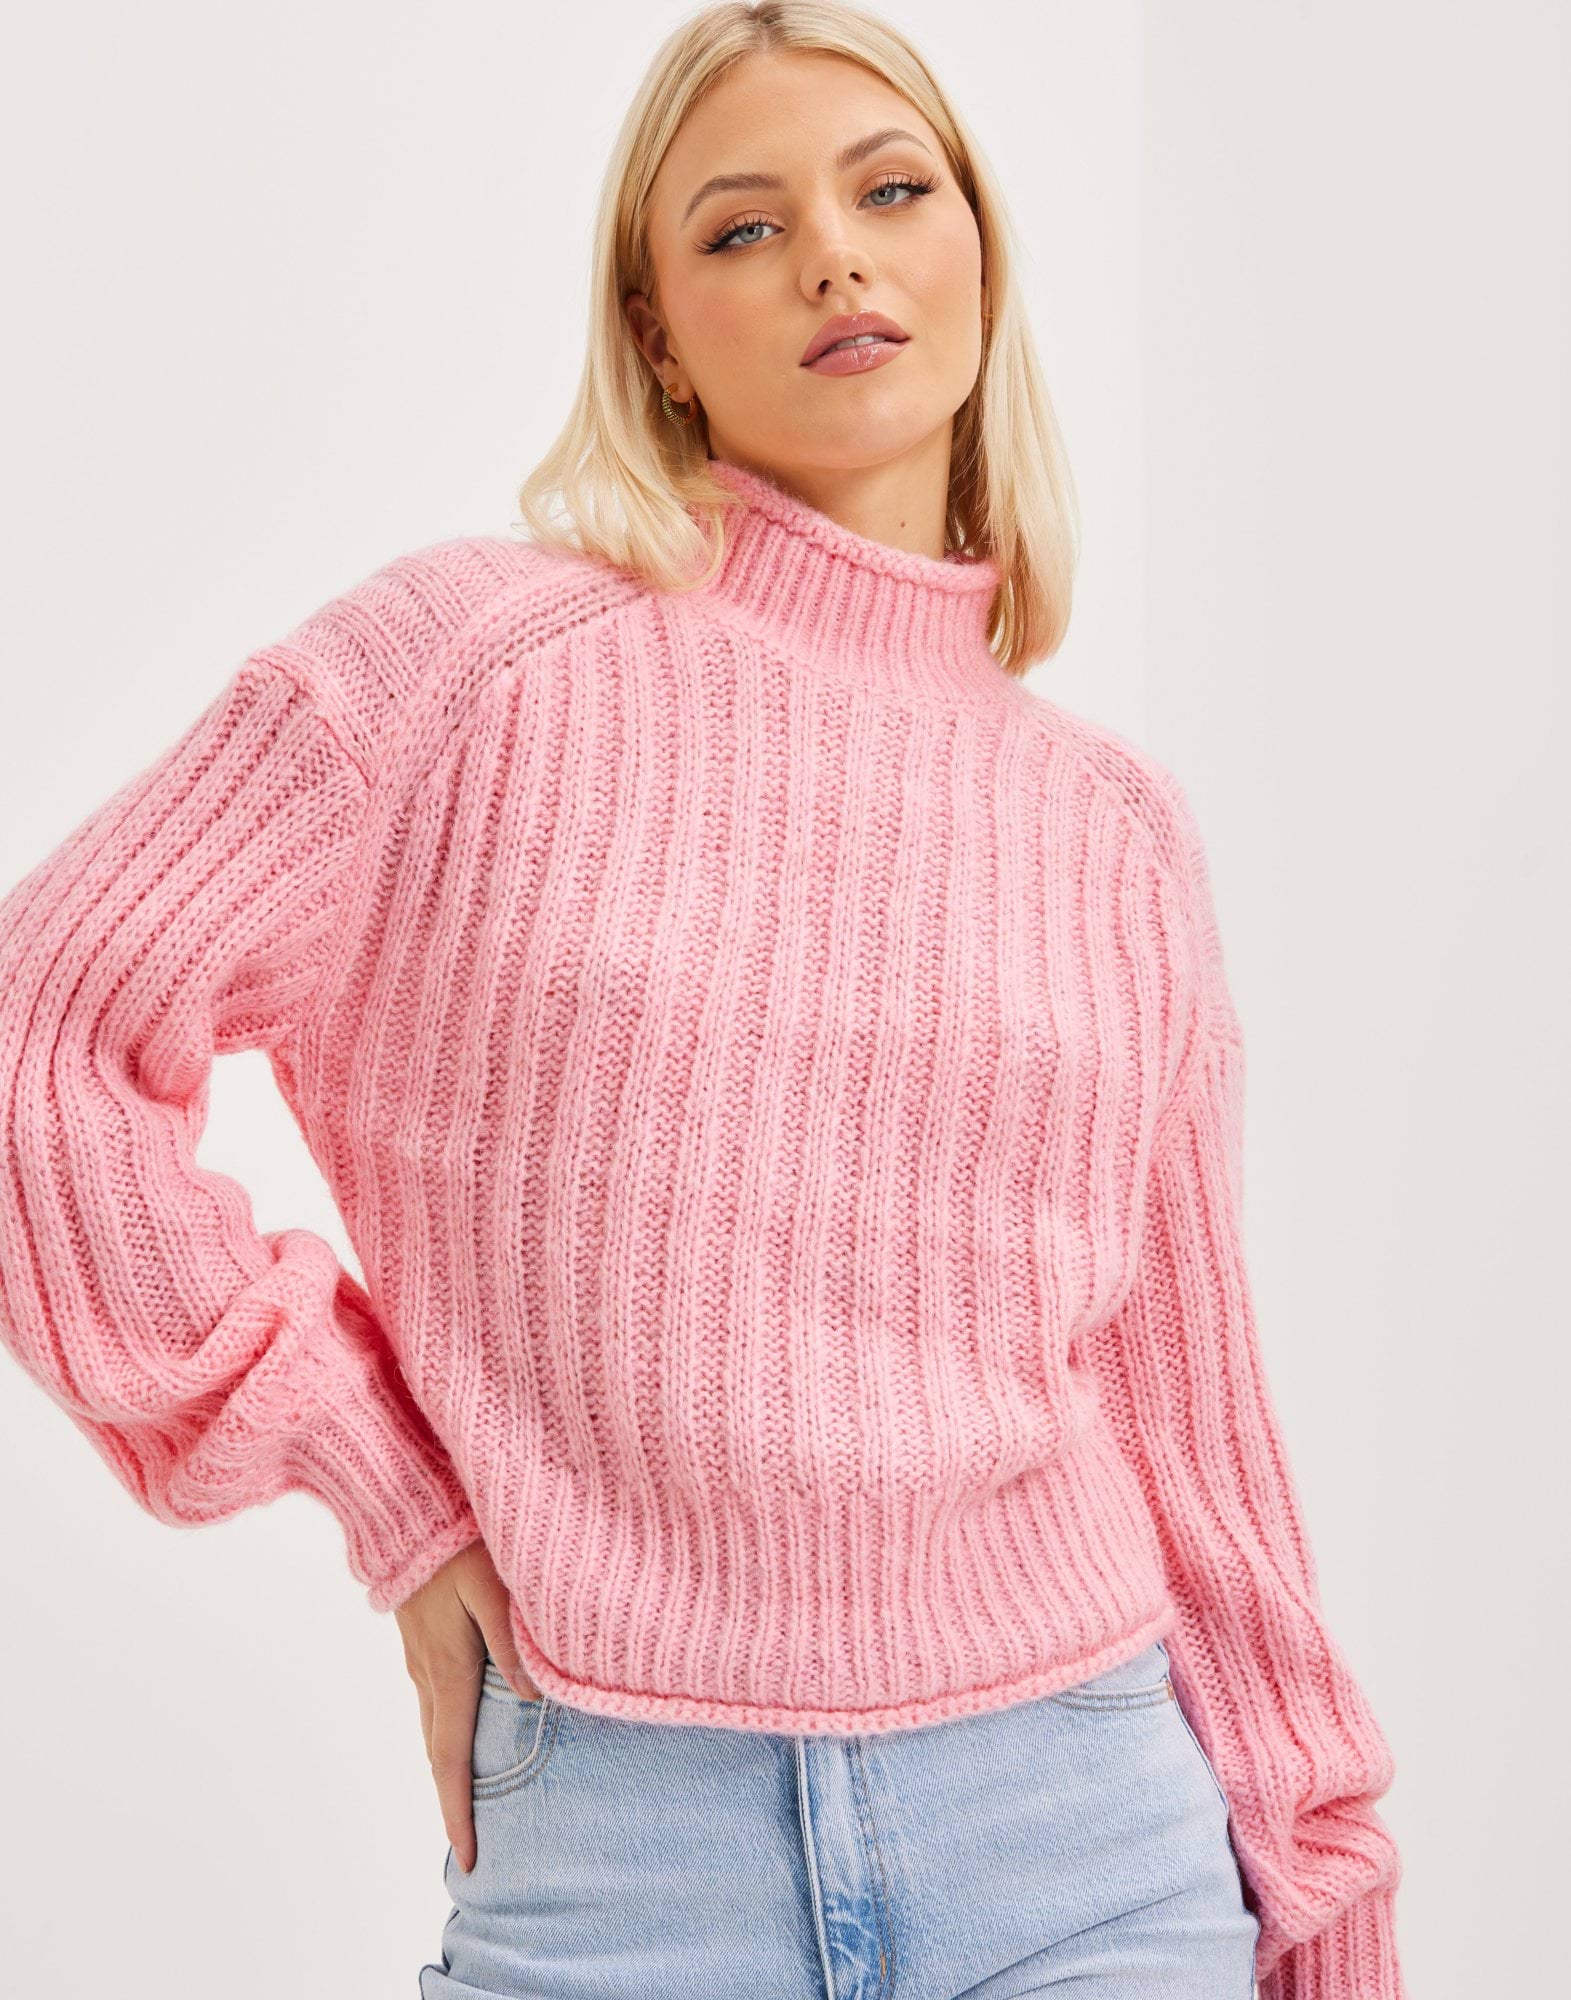 Lovely Chunky Knit Sweater